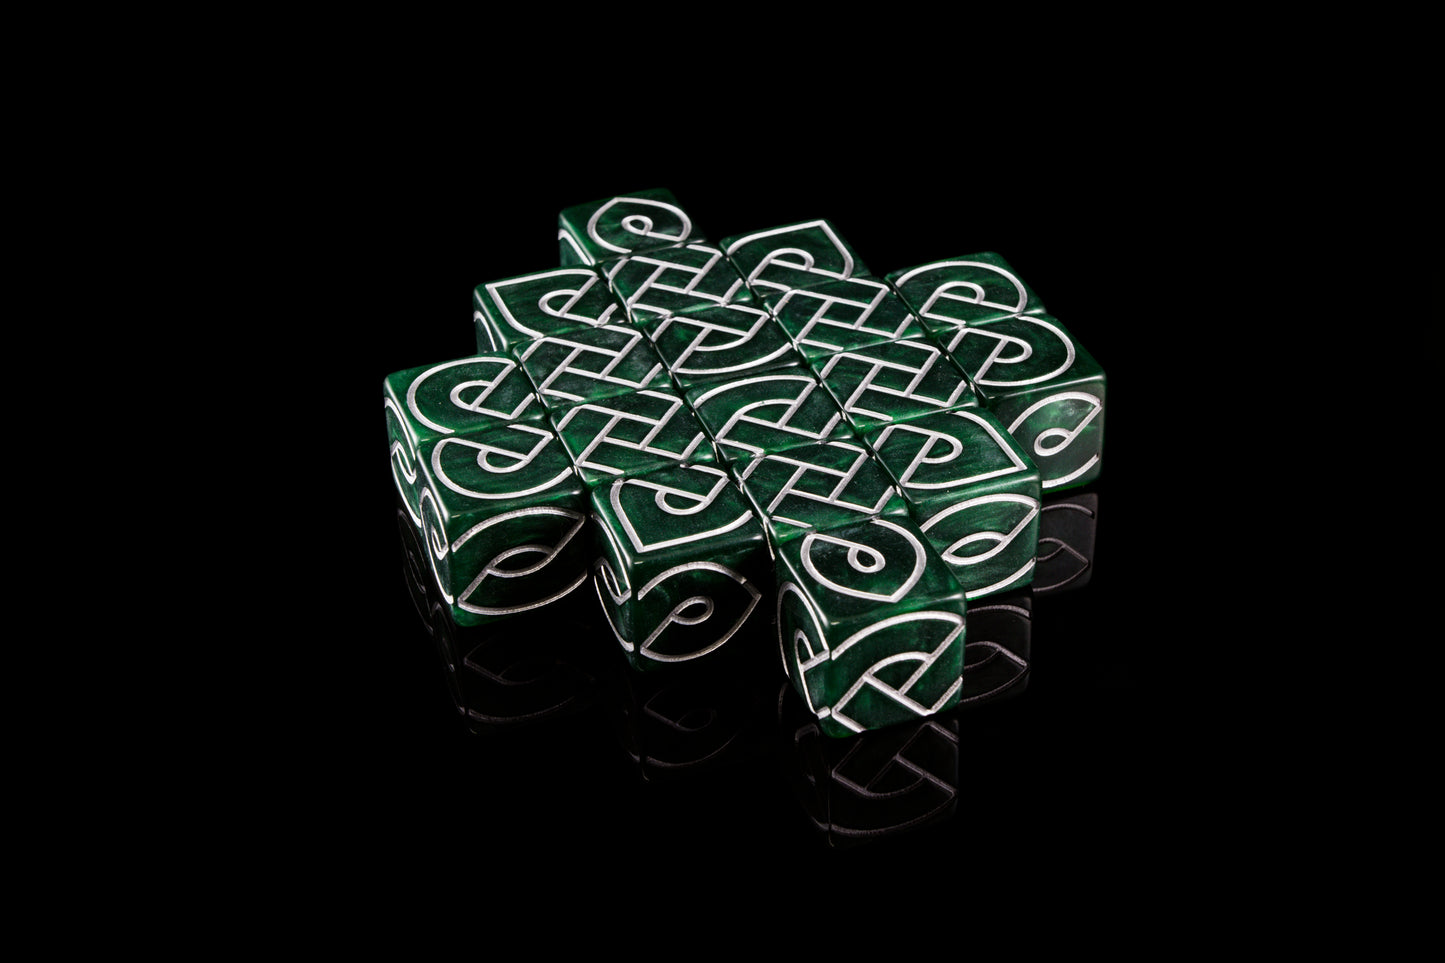 Unboxing Knot Dice from Black Oak Games, games and puzzles using custom  knotwork dice